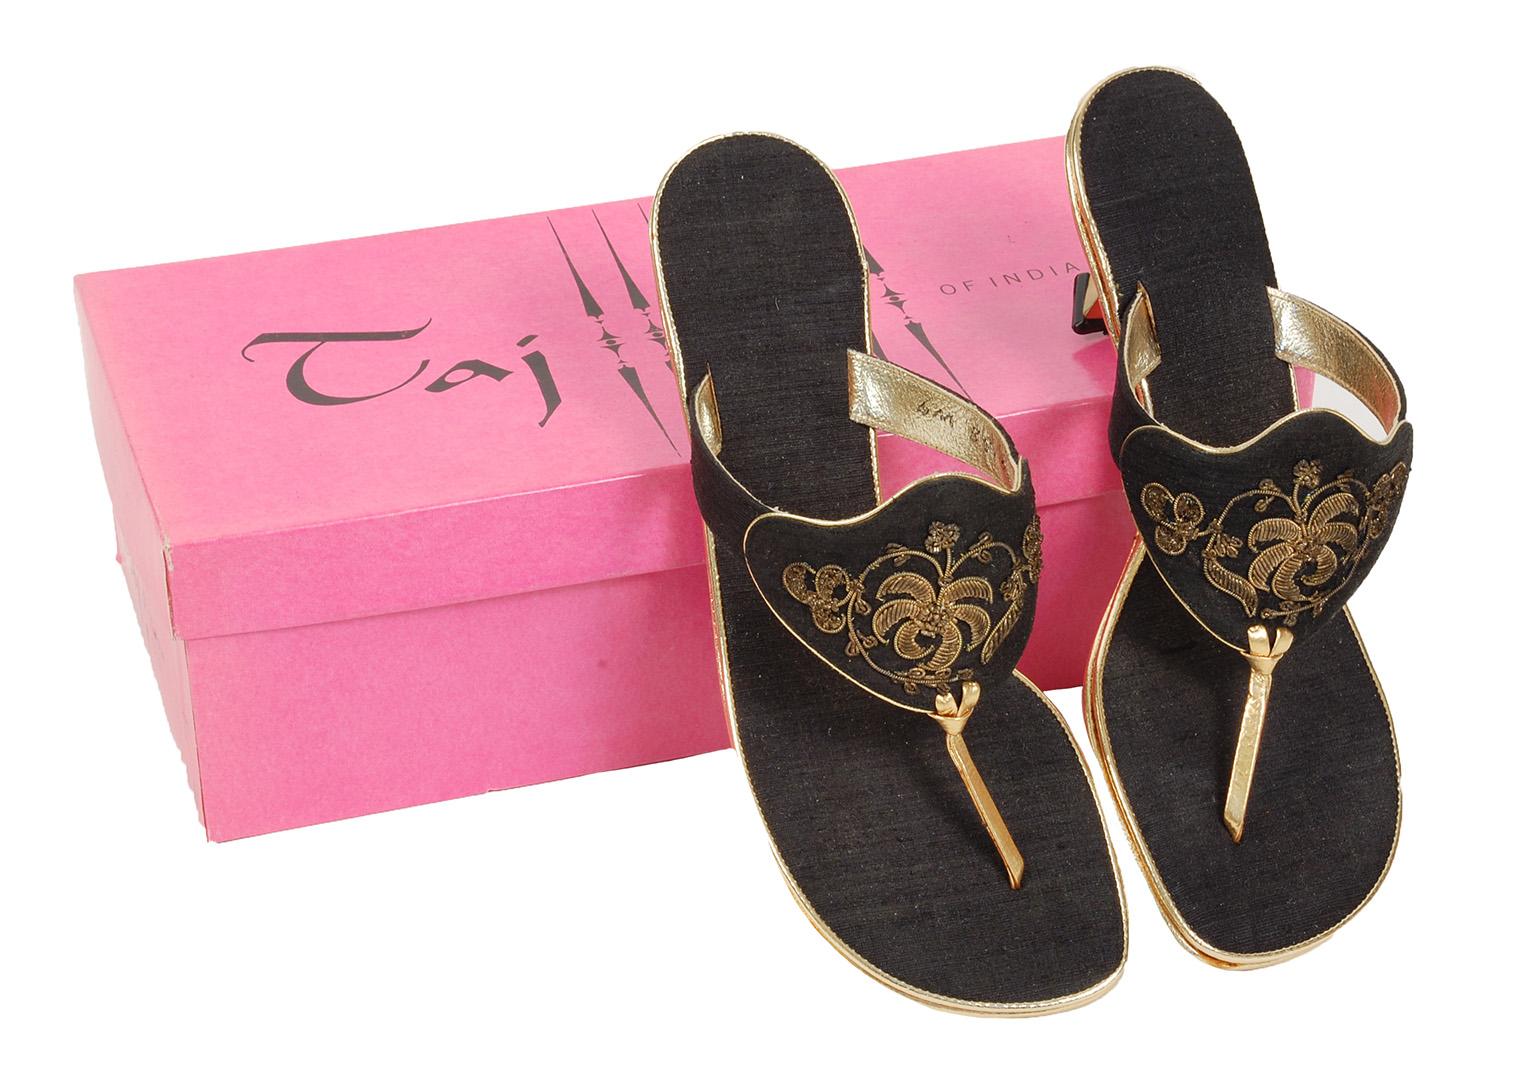 Considered extremely rare luxury items in the mid-century, Taj of India shoes were produced to promote cultural exchange between India and the United States during the spreading threat of Communism. Featuring hand-loomed silk uppers, gold mylar